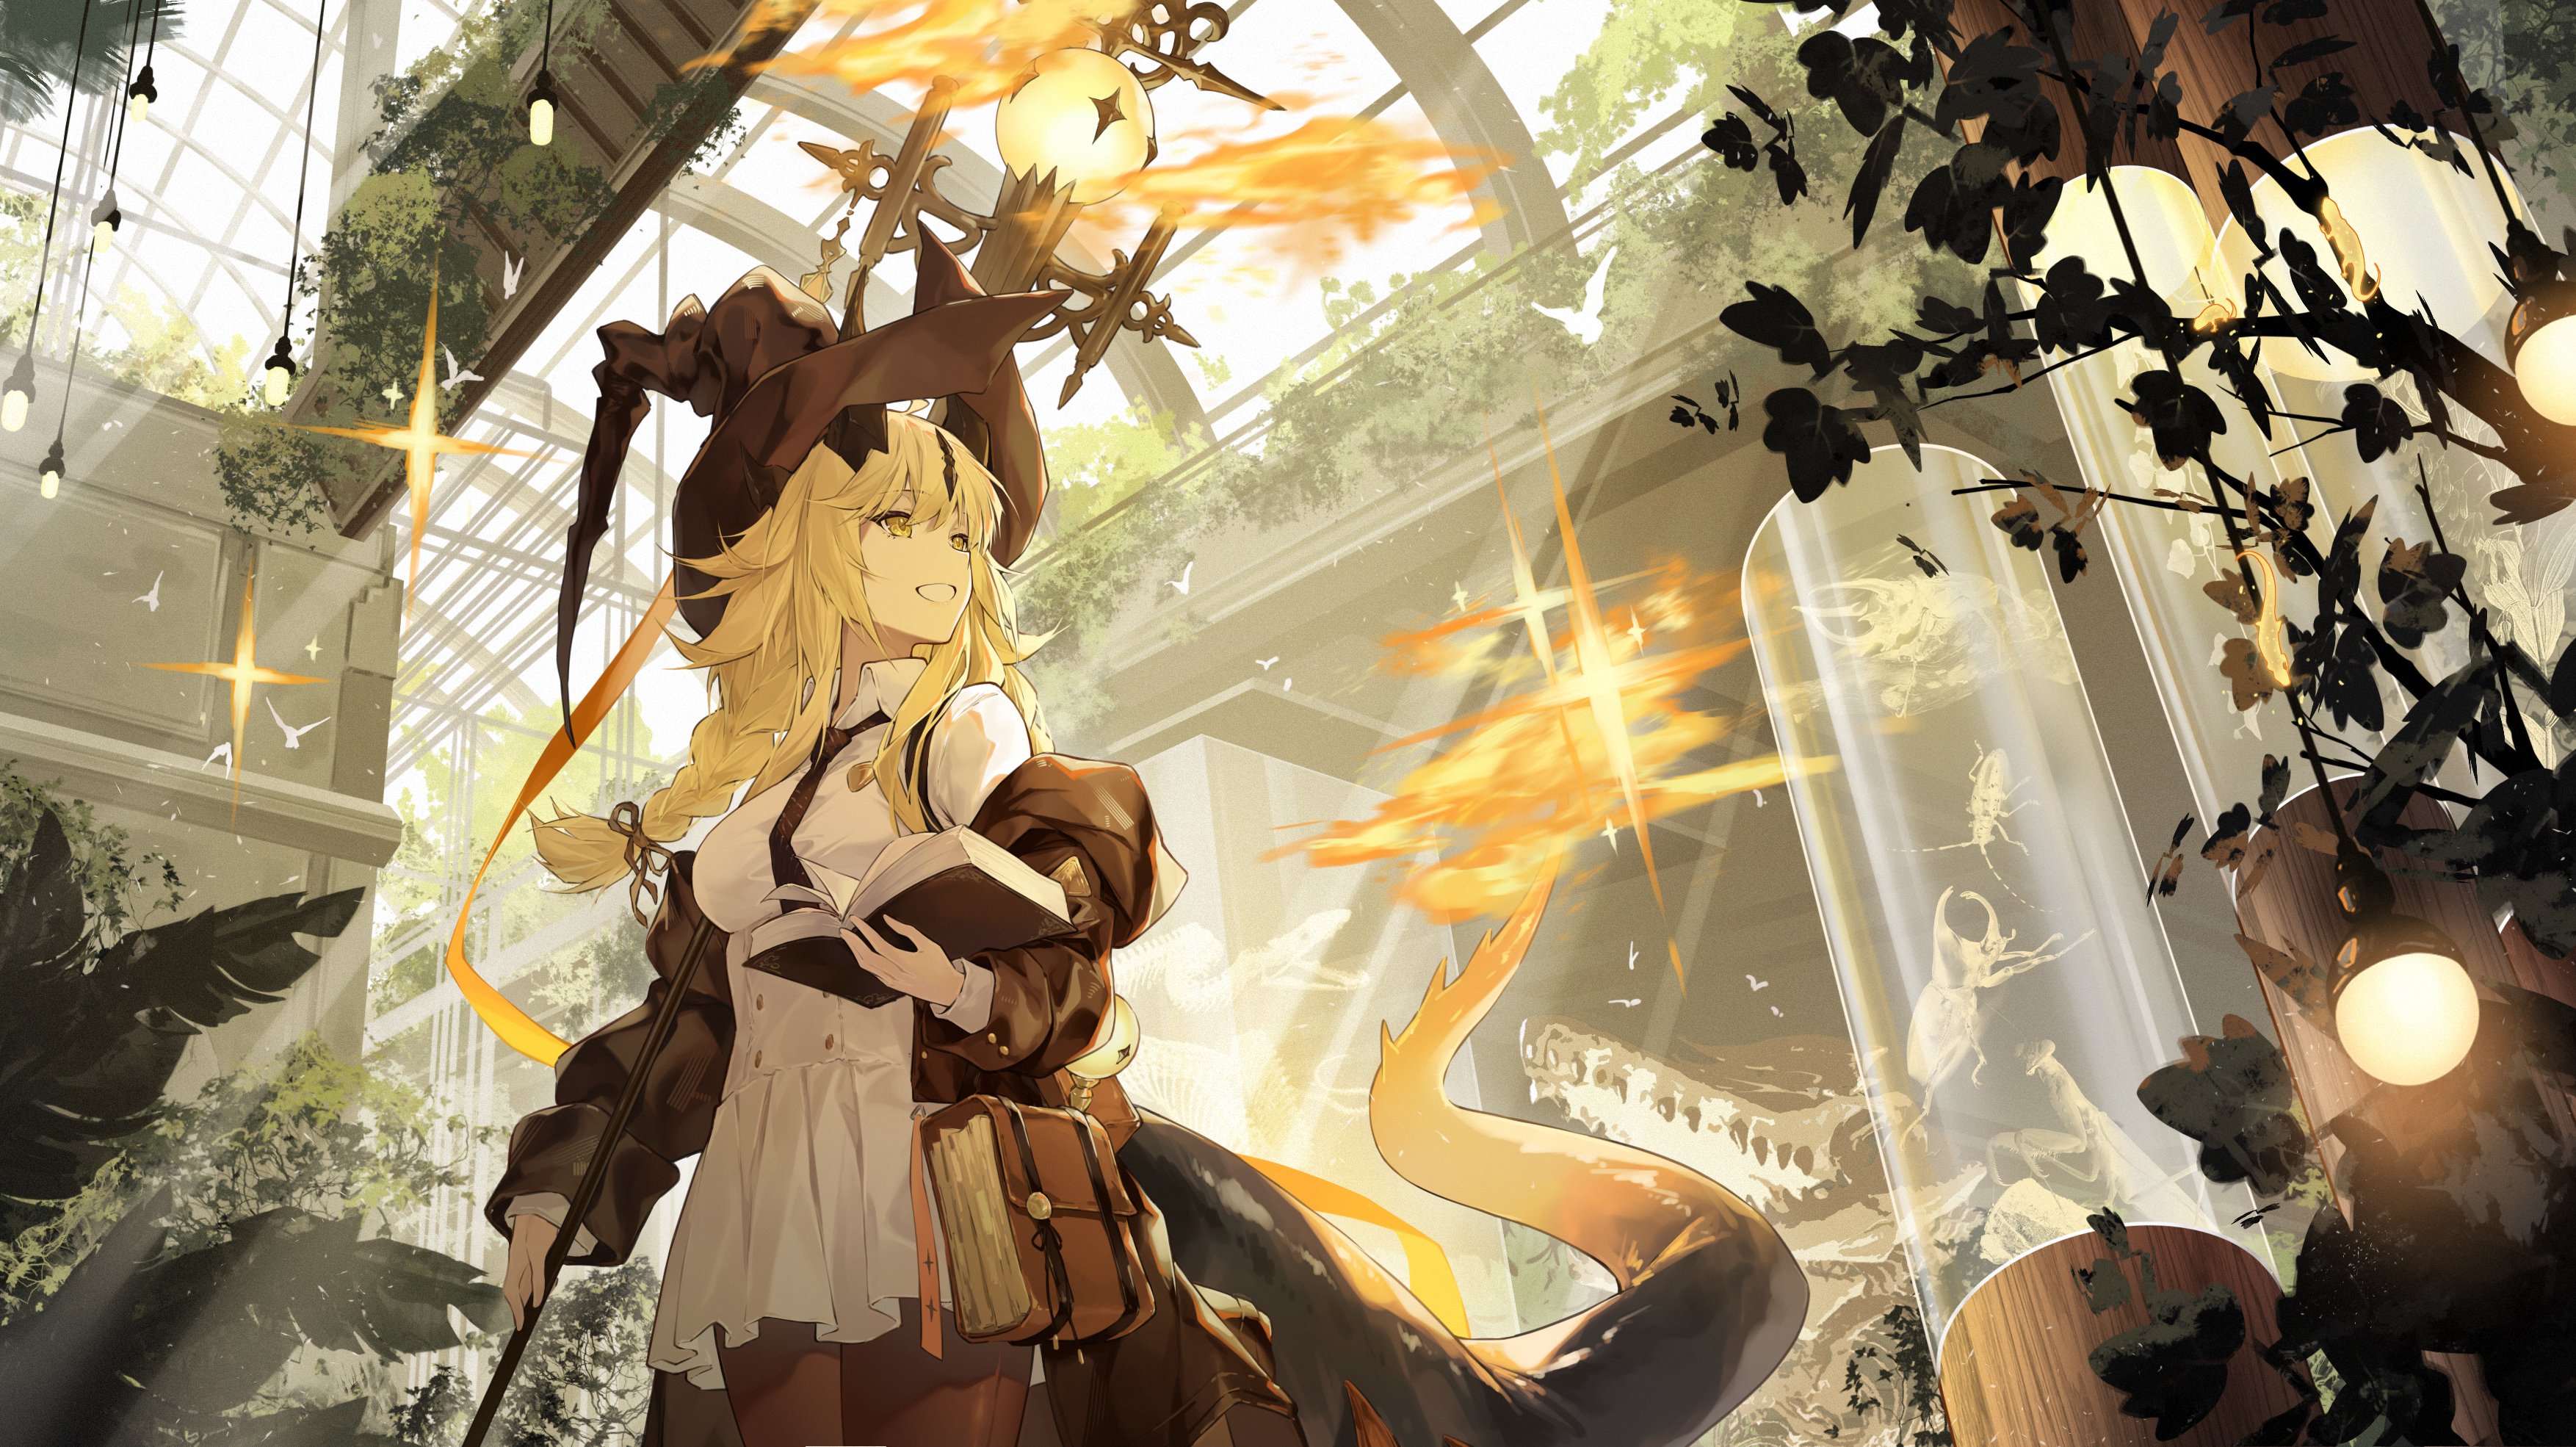 Anime 3508x1970 anime anime girls Arknights Reed (Arknights) Reed The Flame Shadow (Arknights) XiTongYuXi looking away book in hand books standing off shoulder greenhouse leaves blonde yellow eyes witch hat sunlight hair bows plants lights tie braids twintails Praying Mantis beetles insect